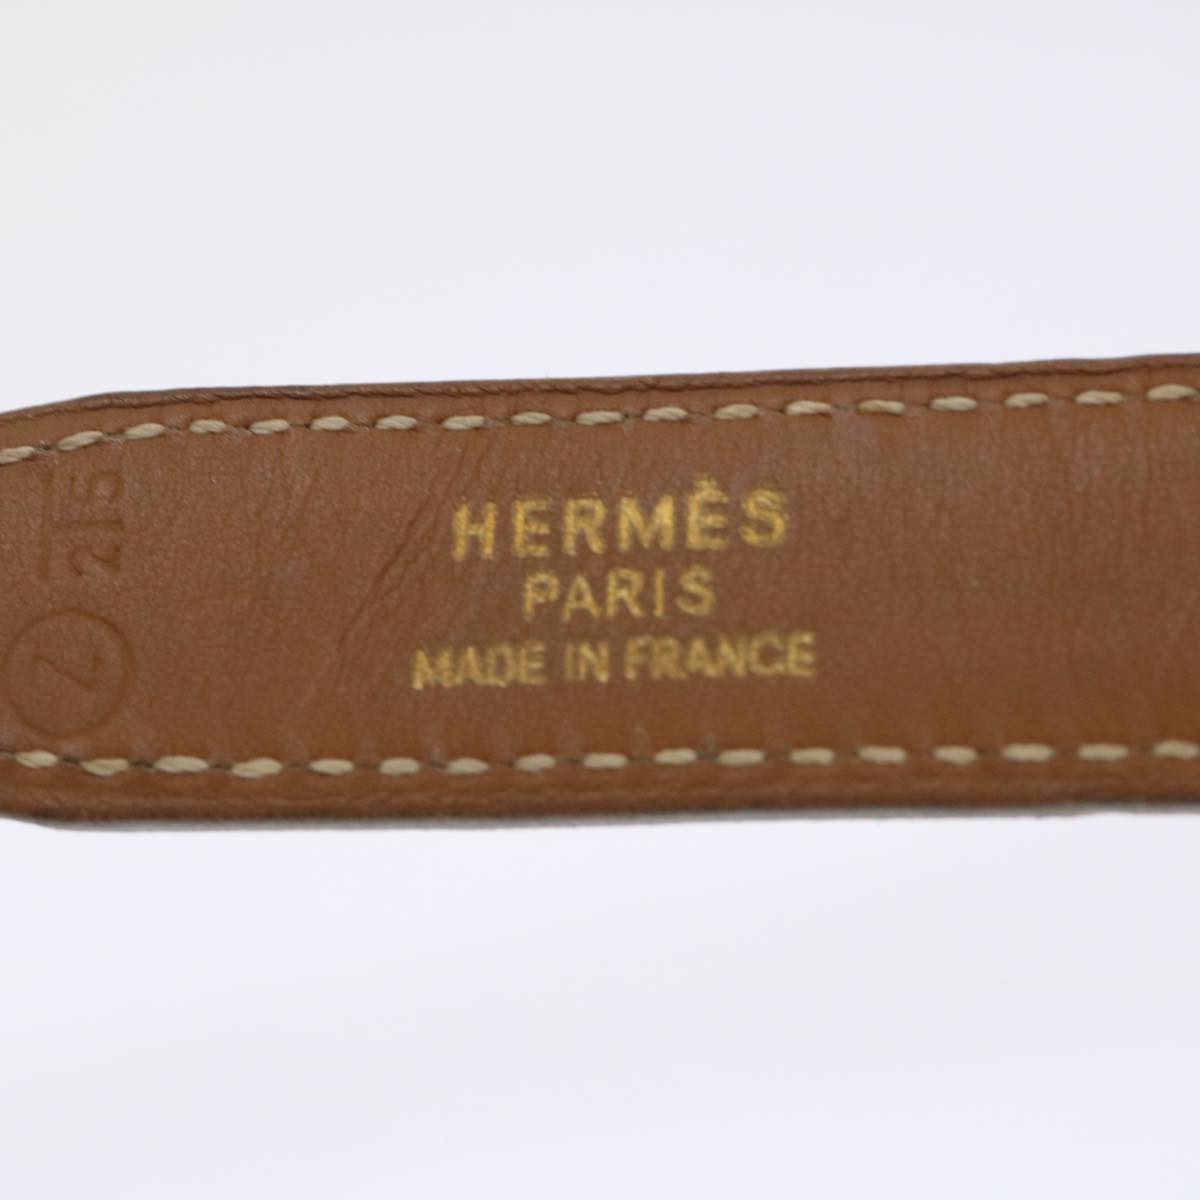 HERMES Belt Leather 29.1"" Red Auth am4718